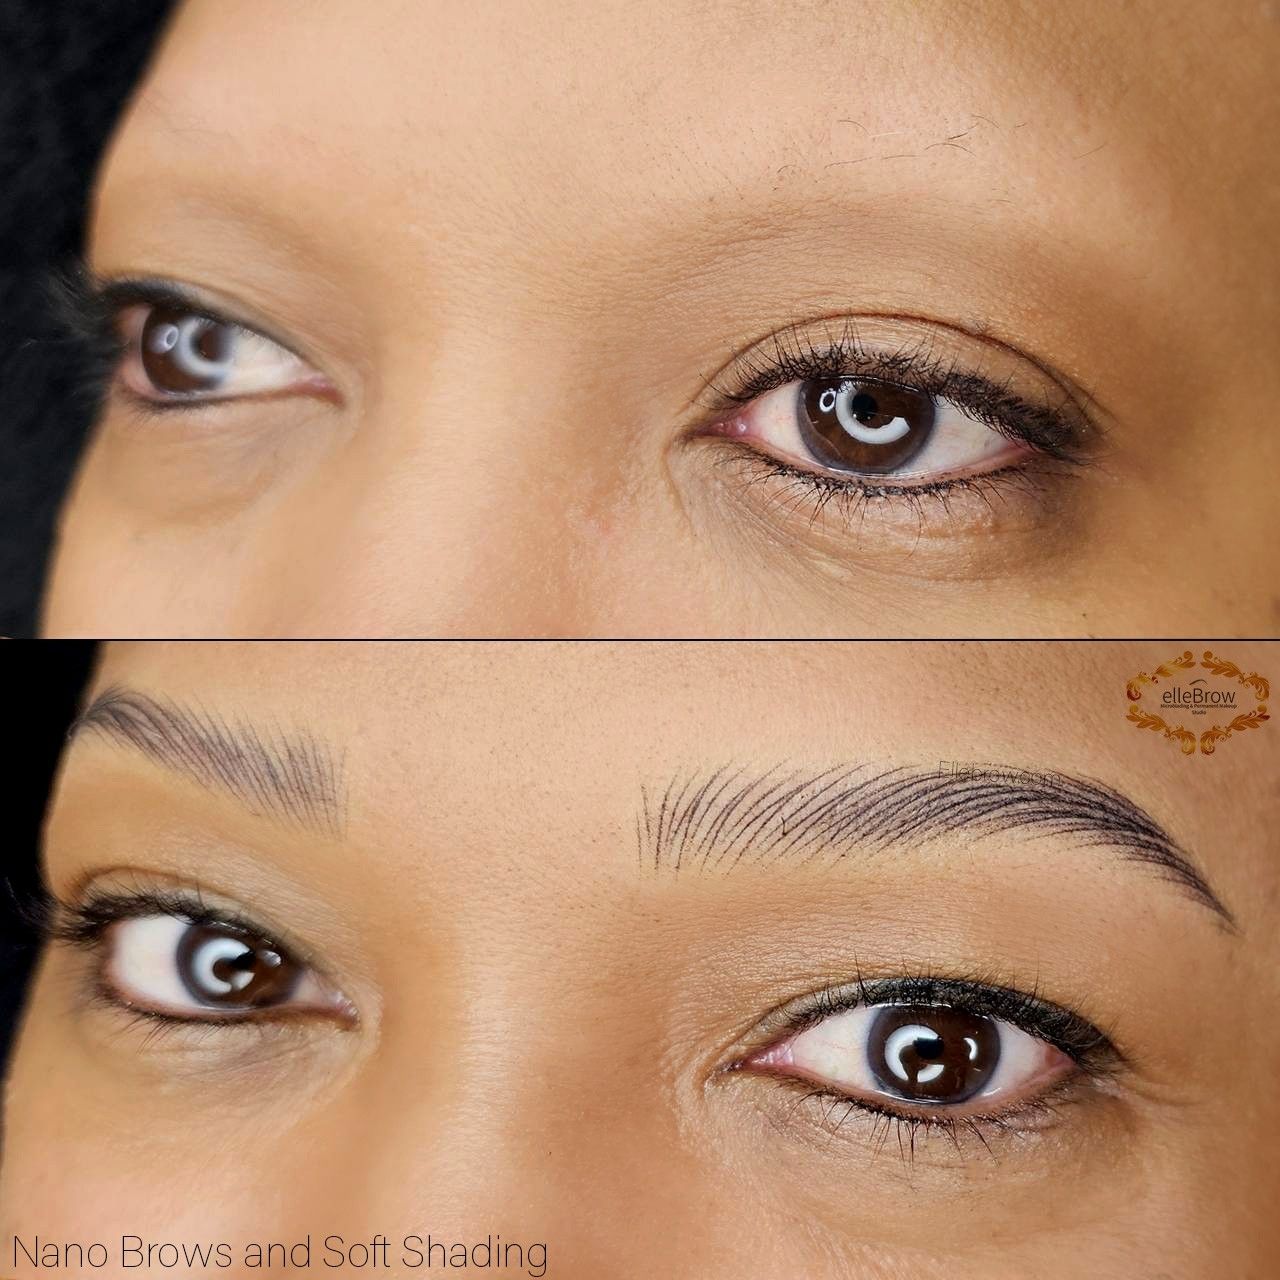 Nano Brows with Soft Shading